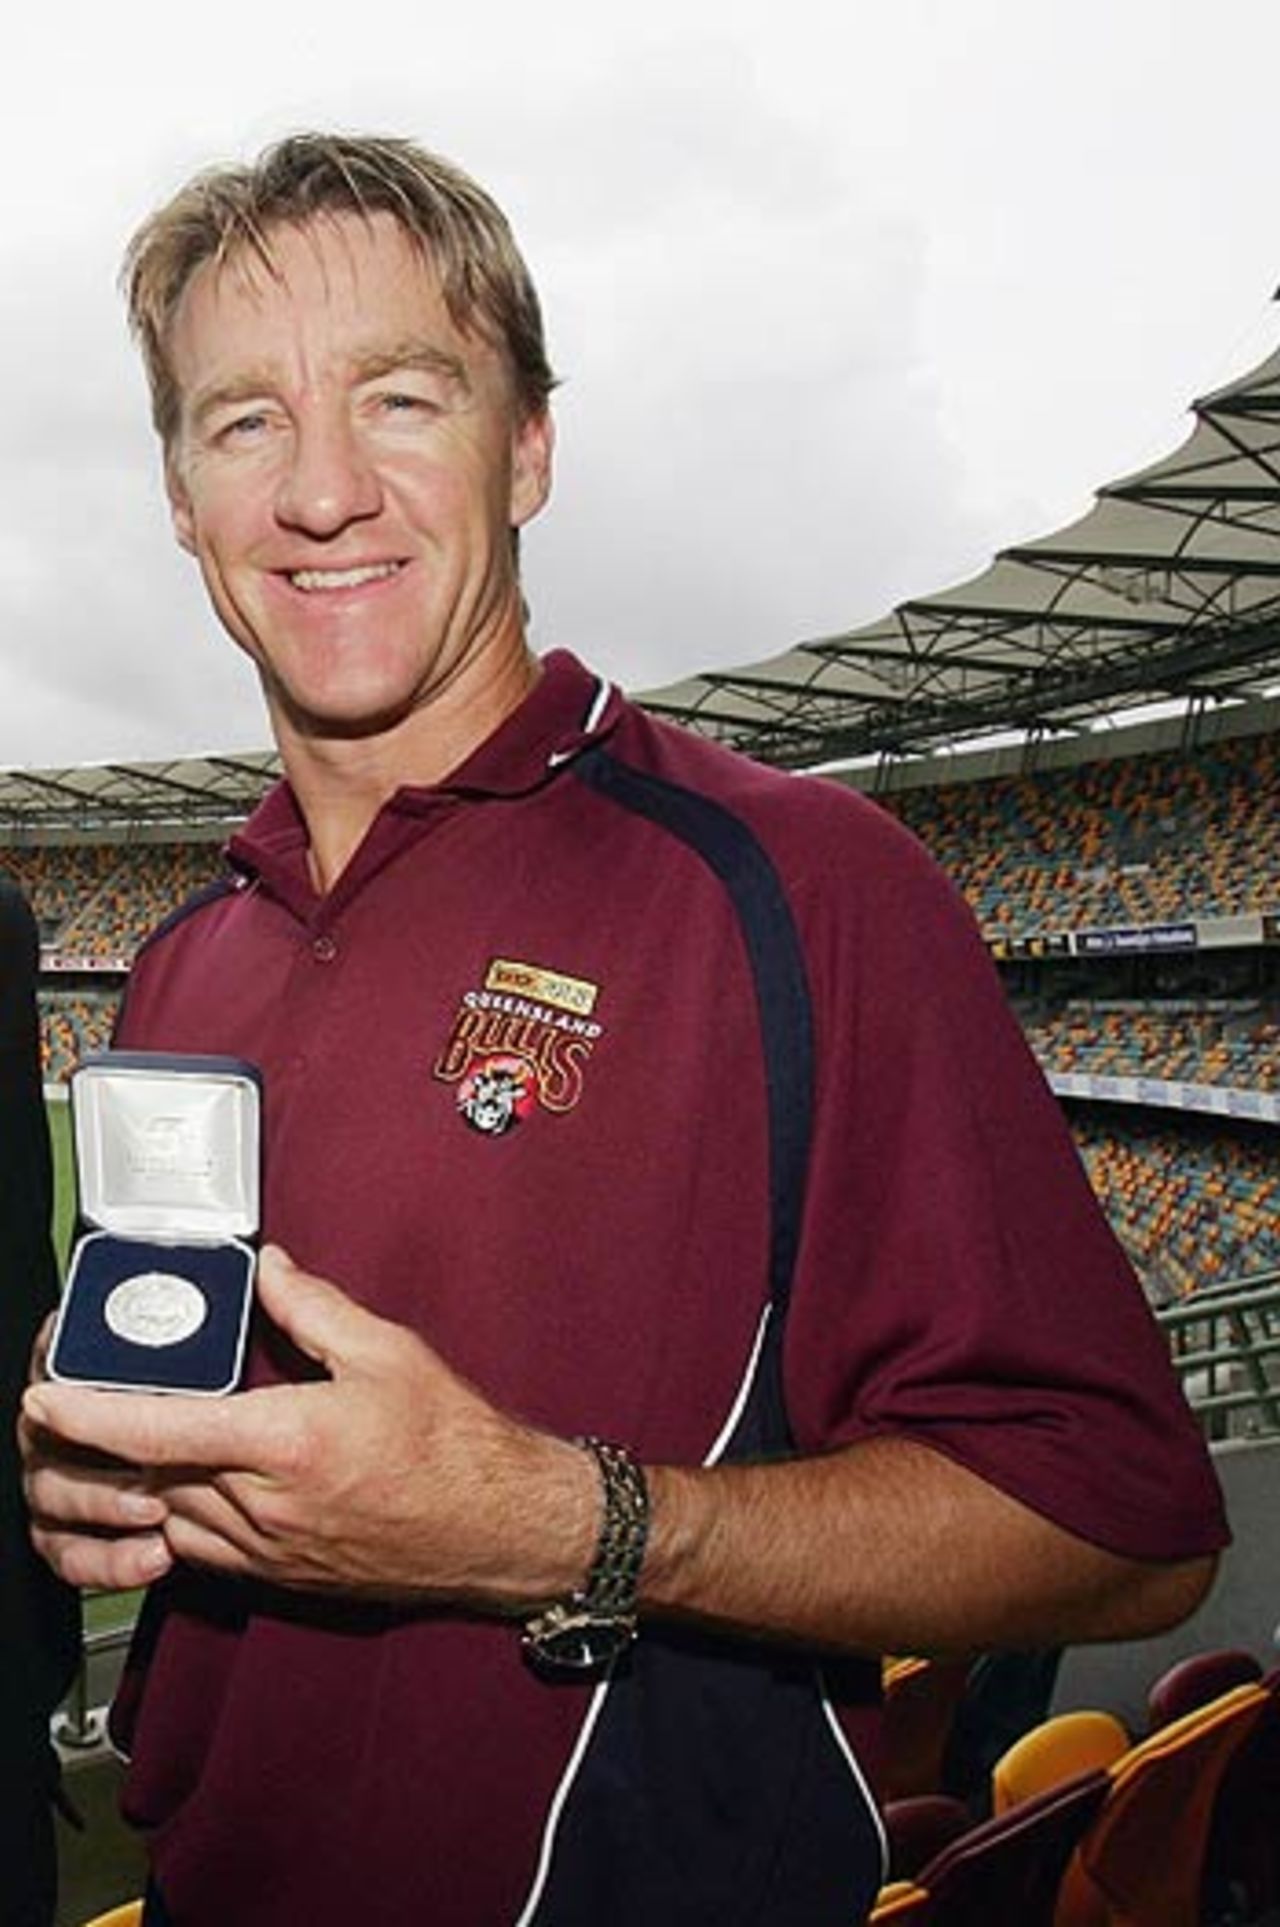 Andy Bichel poses with the Pura Cup Player of the Year award, State Cricket Awards, Woolloongabba, Brisbane, March 22 2006